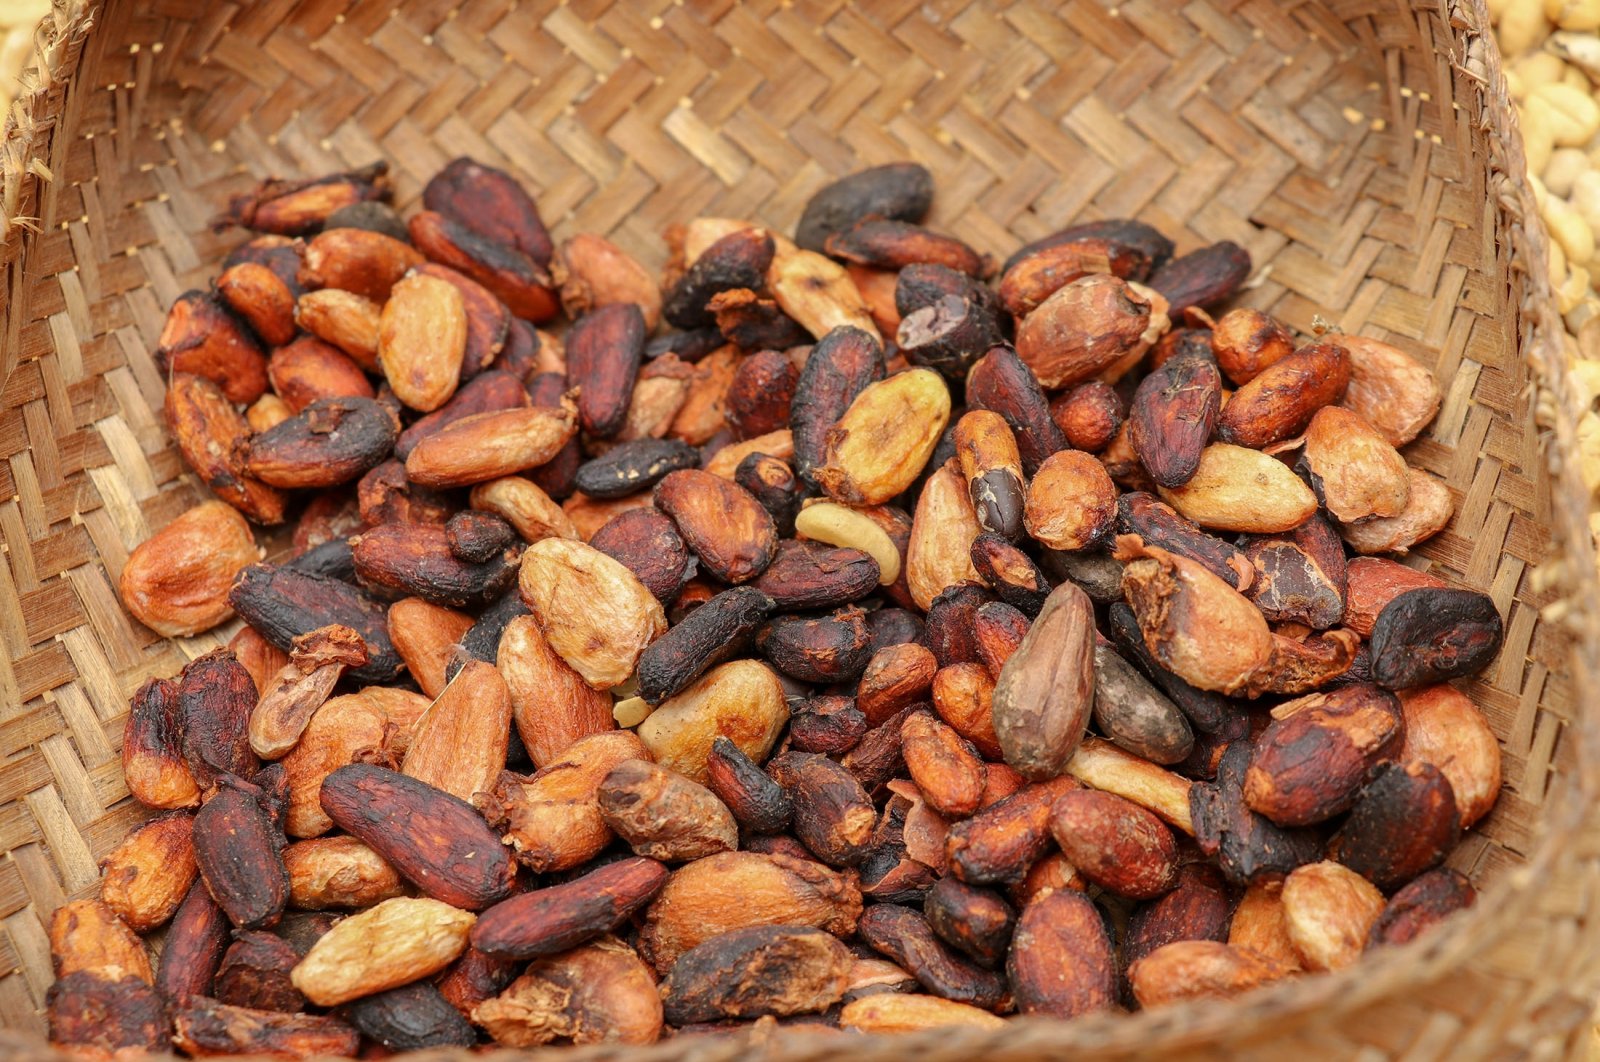 Processed cocoa bean shells may hold the promise of mitigating climate change. (Shutterstock Photo)